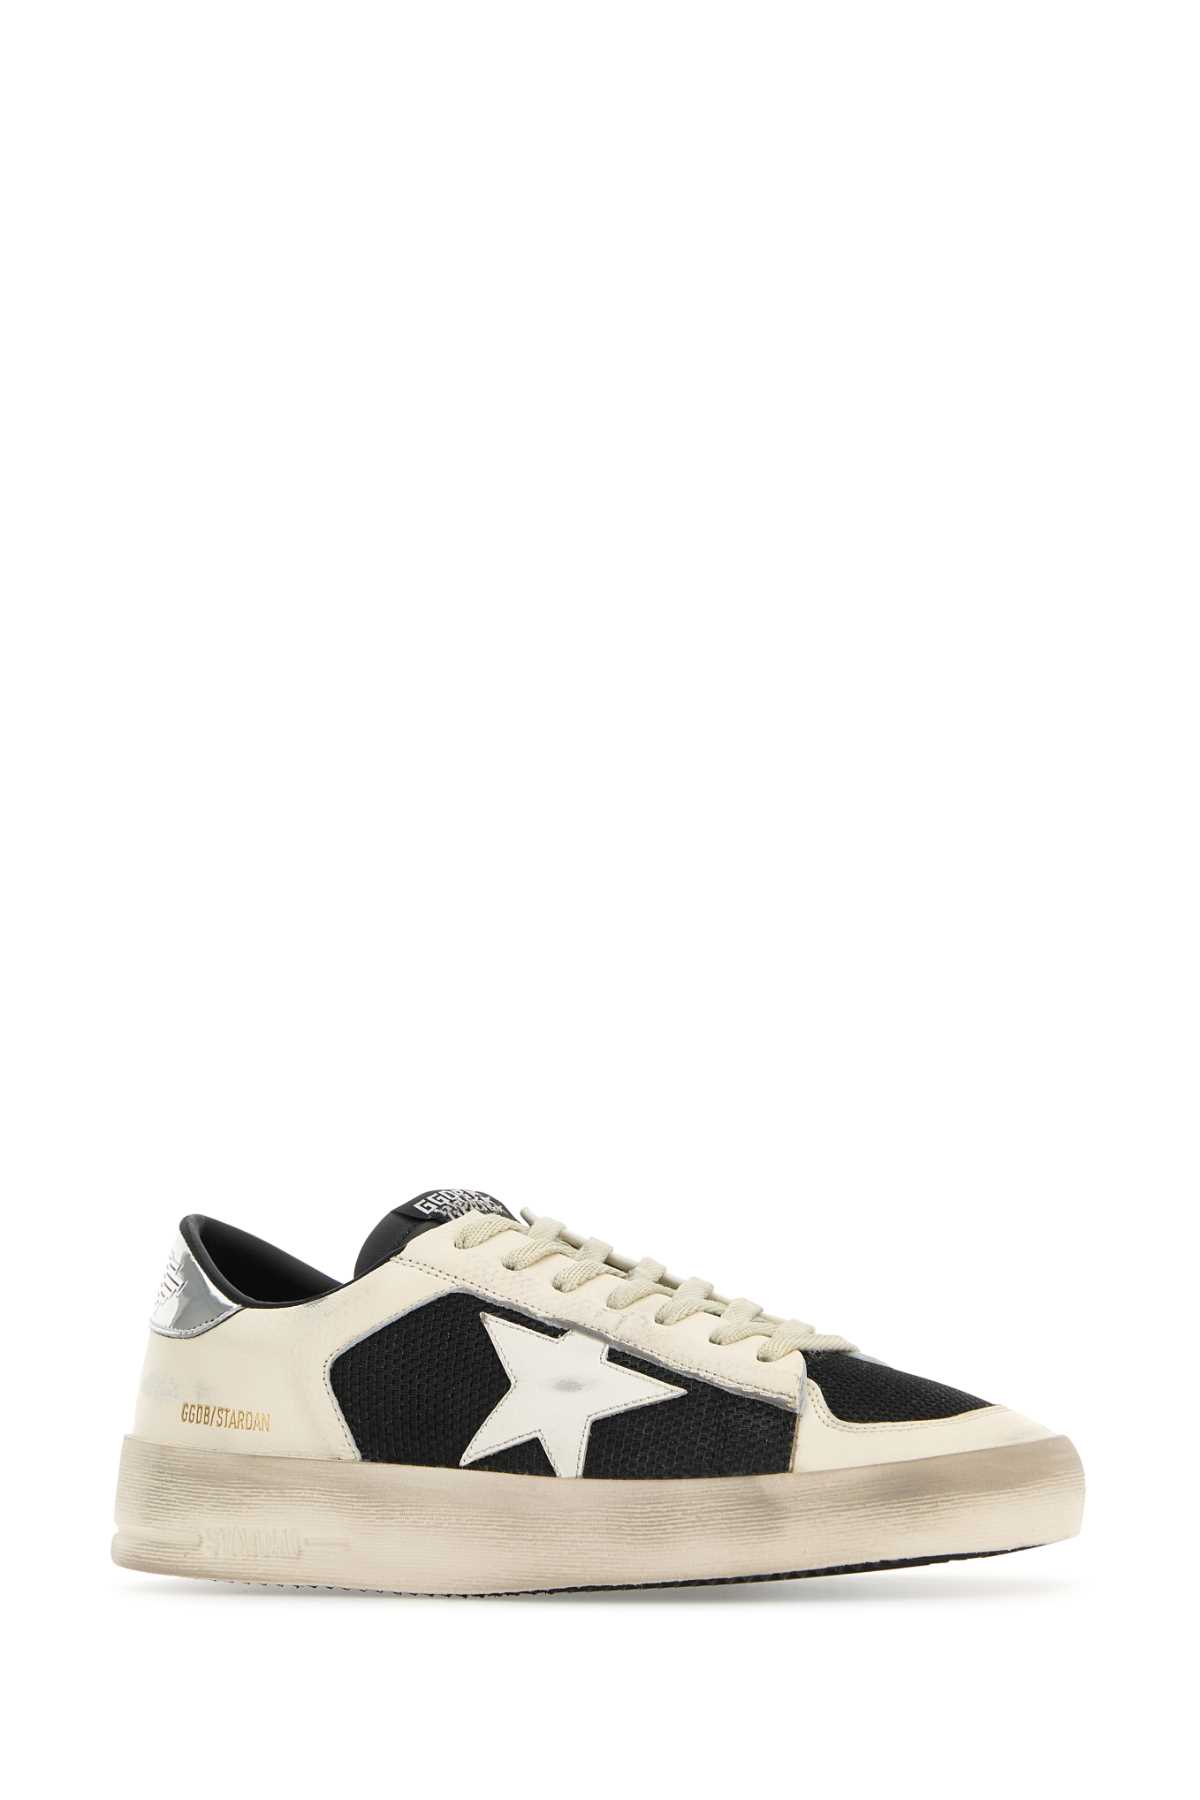 GOLDEN GOOSE MULTIcolour LEATHER AND MESH STARDAN trainers